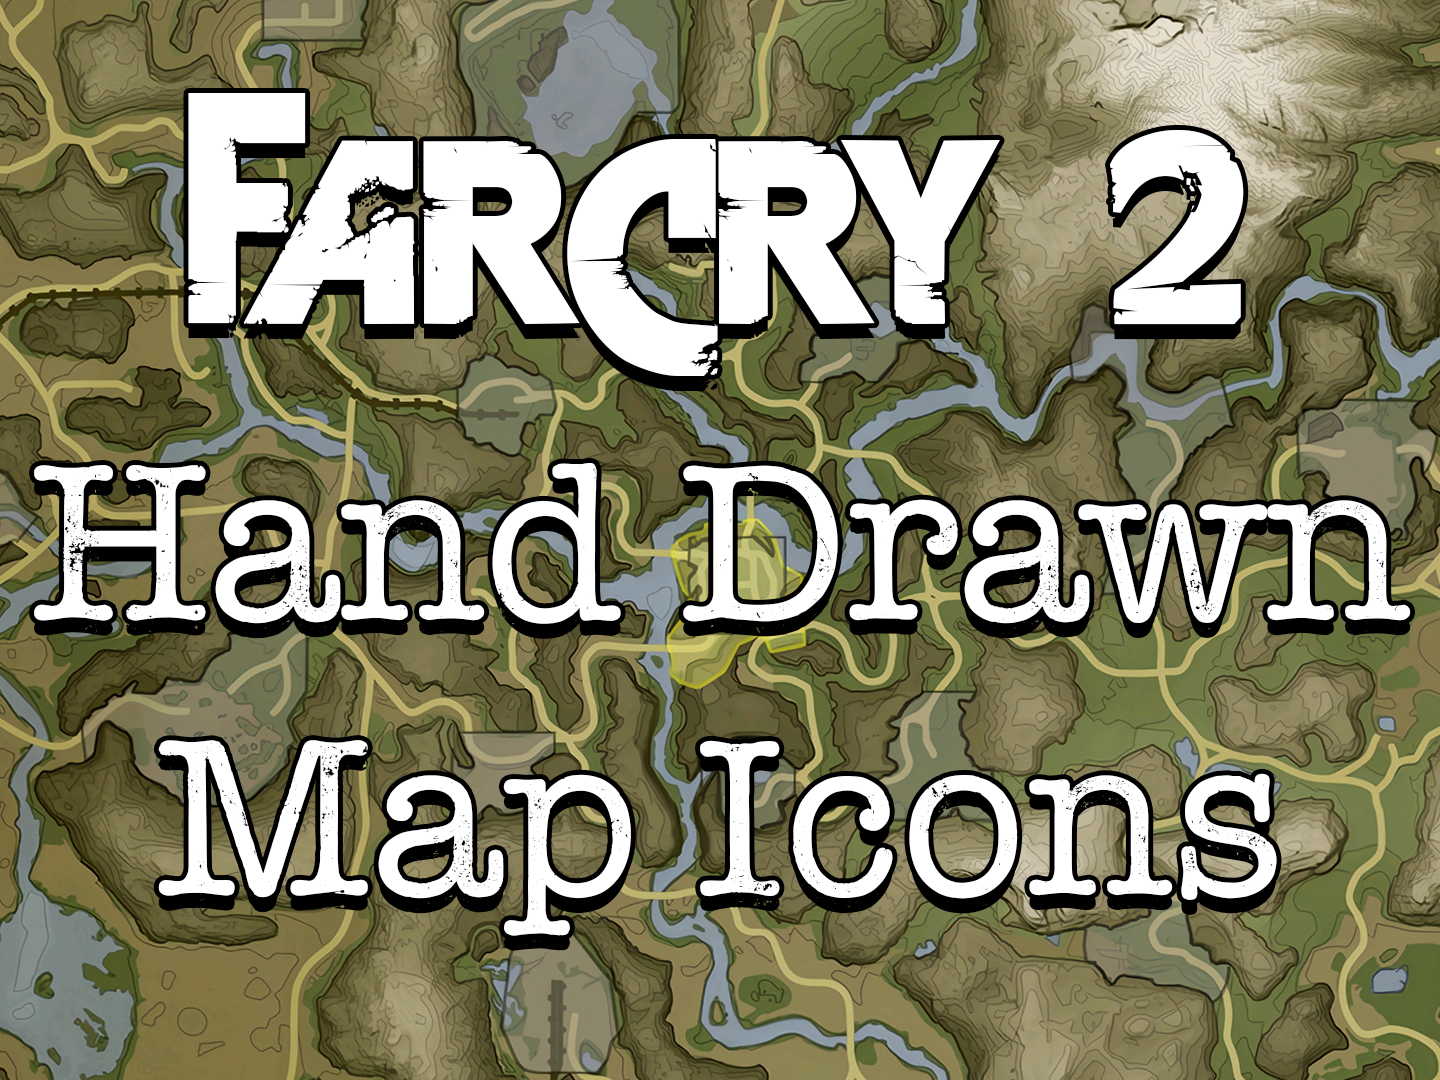 Image 1 - Far Cry 2: Complete Map Collection mod for Far Cry 2 - Mod DB